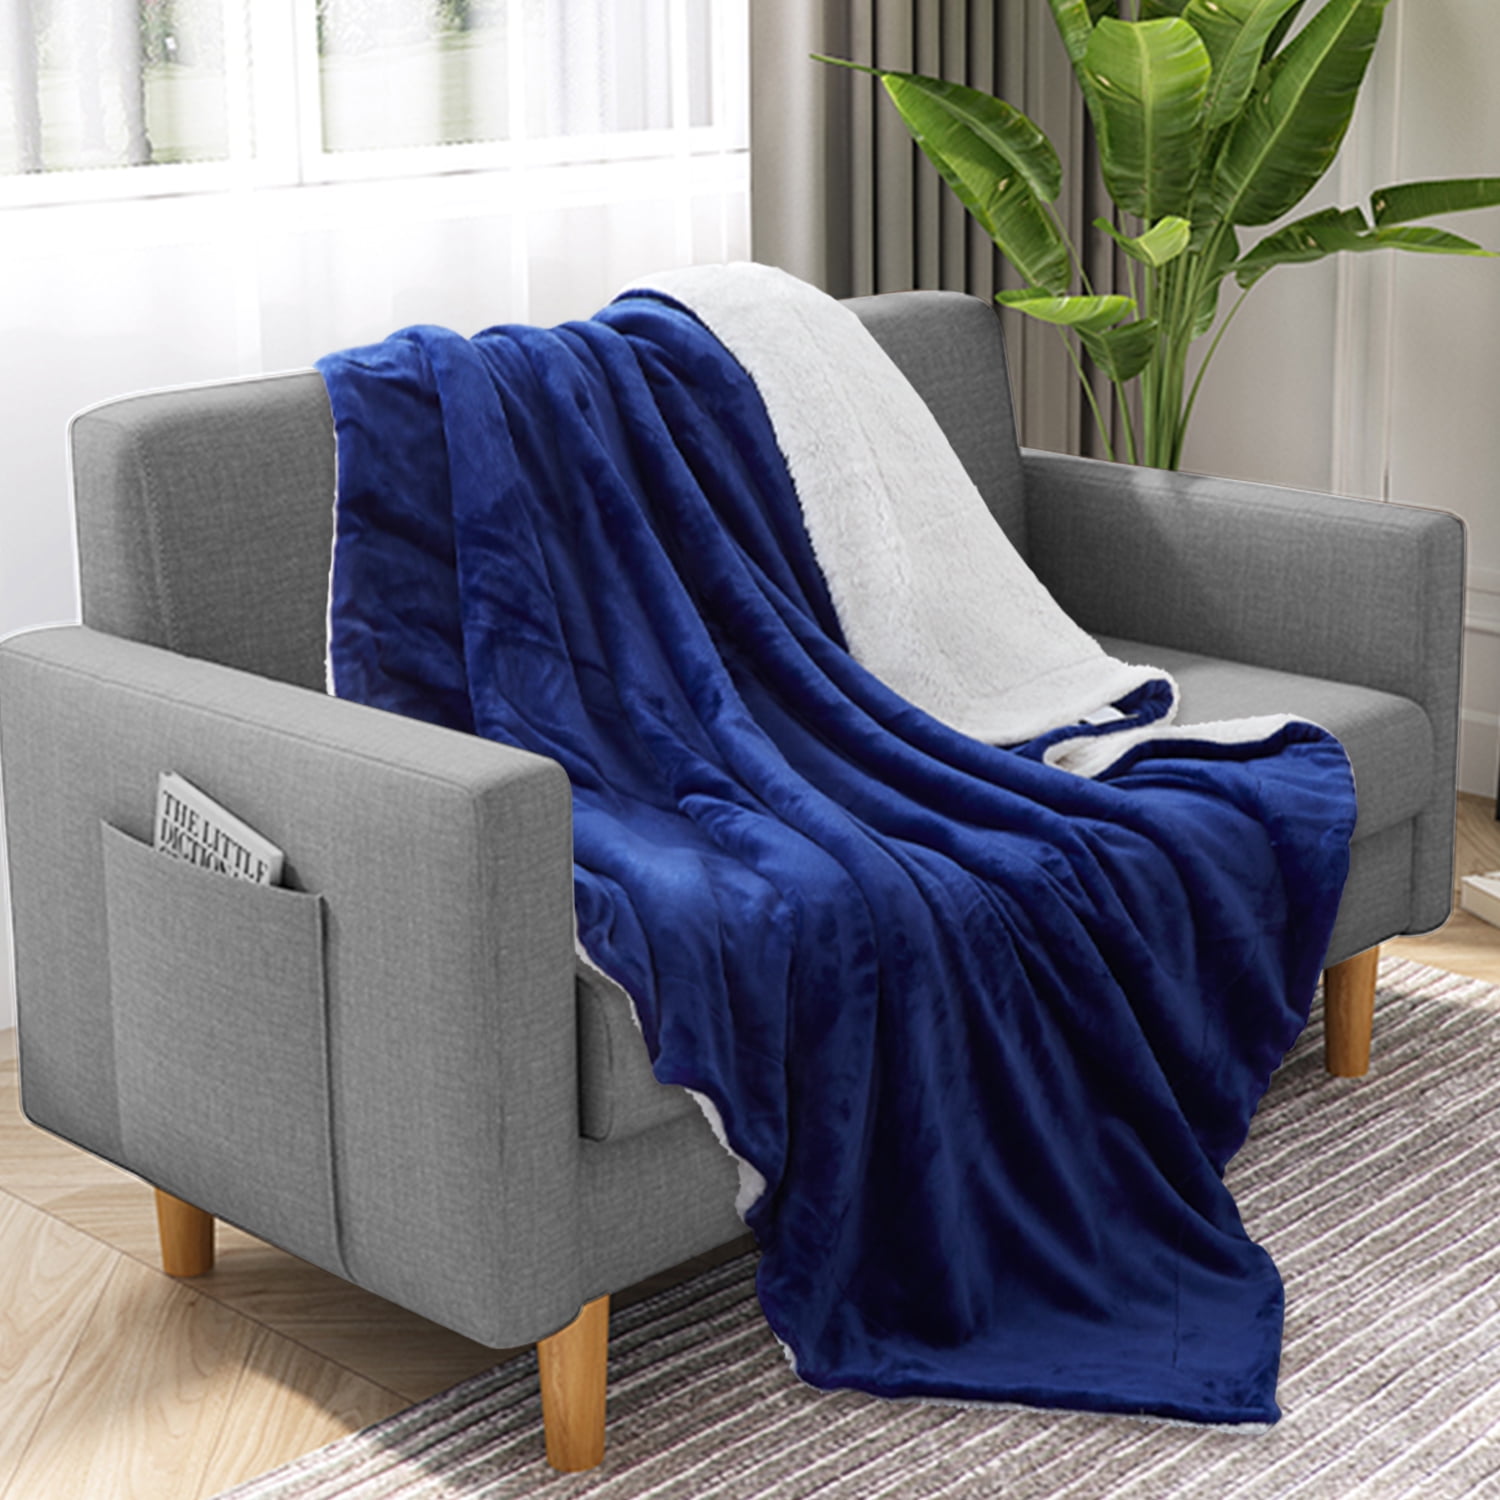 JML Sherpa Fleece Blanket Twin Size, Soft Warm Plush Blanket for Bed Sofa  Couch,Navy 